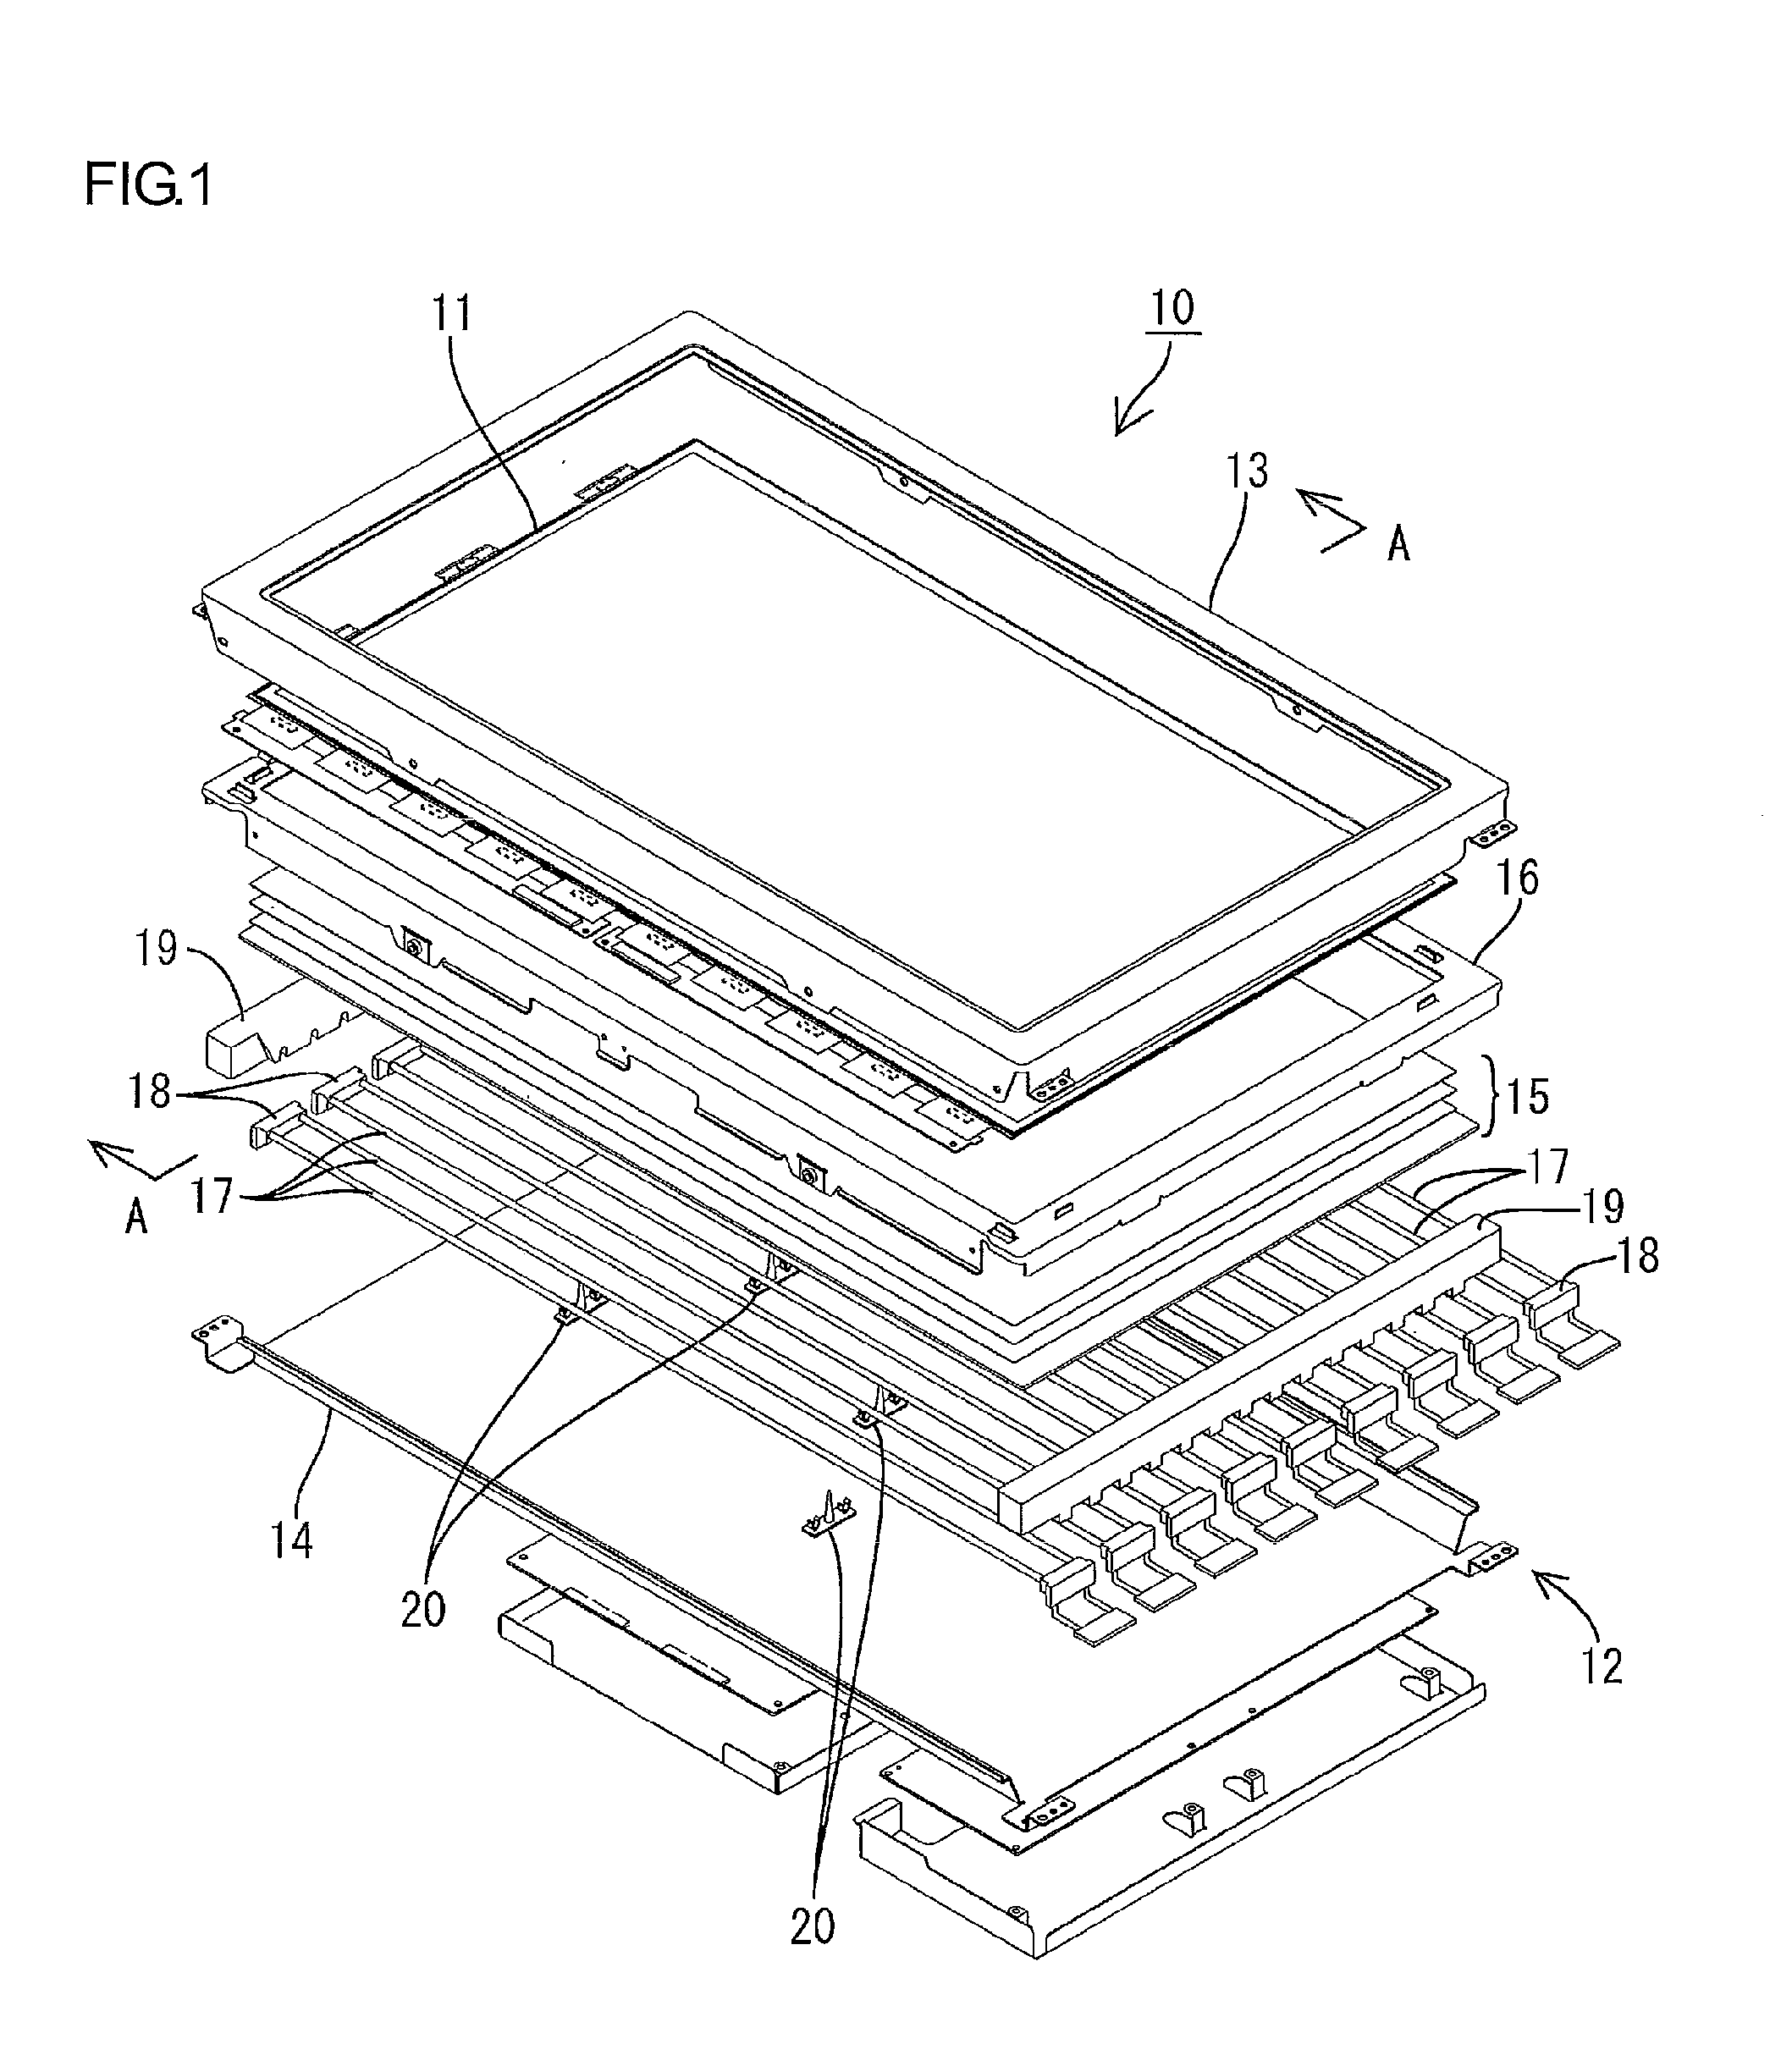 Liquid crystal display device and method of manufacturing same